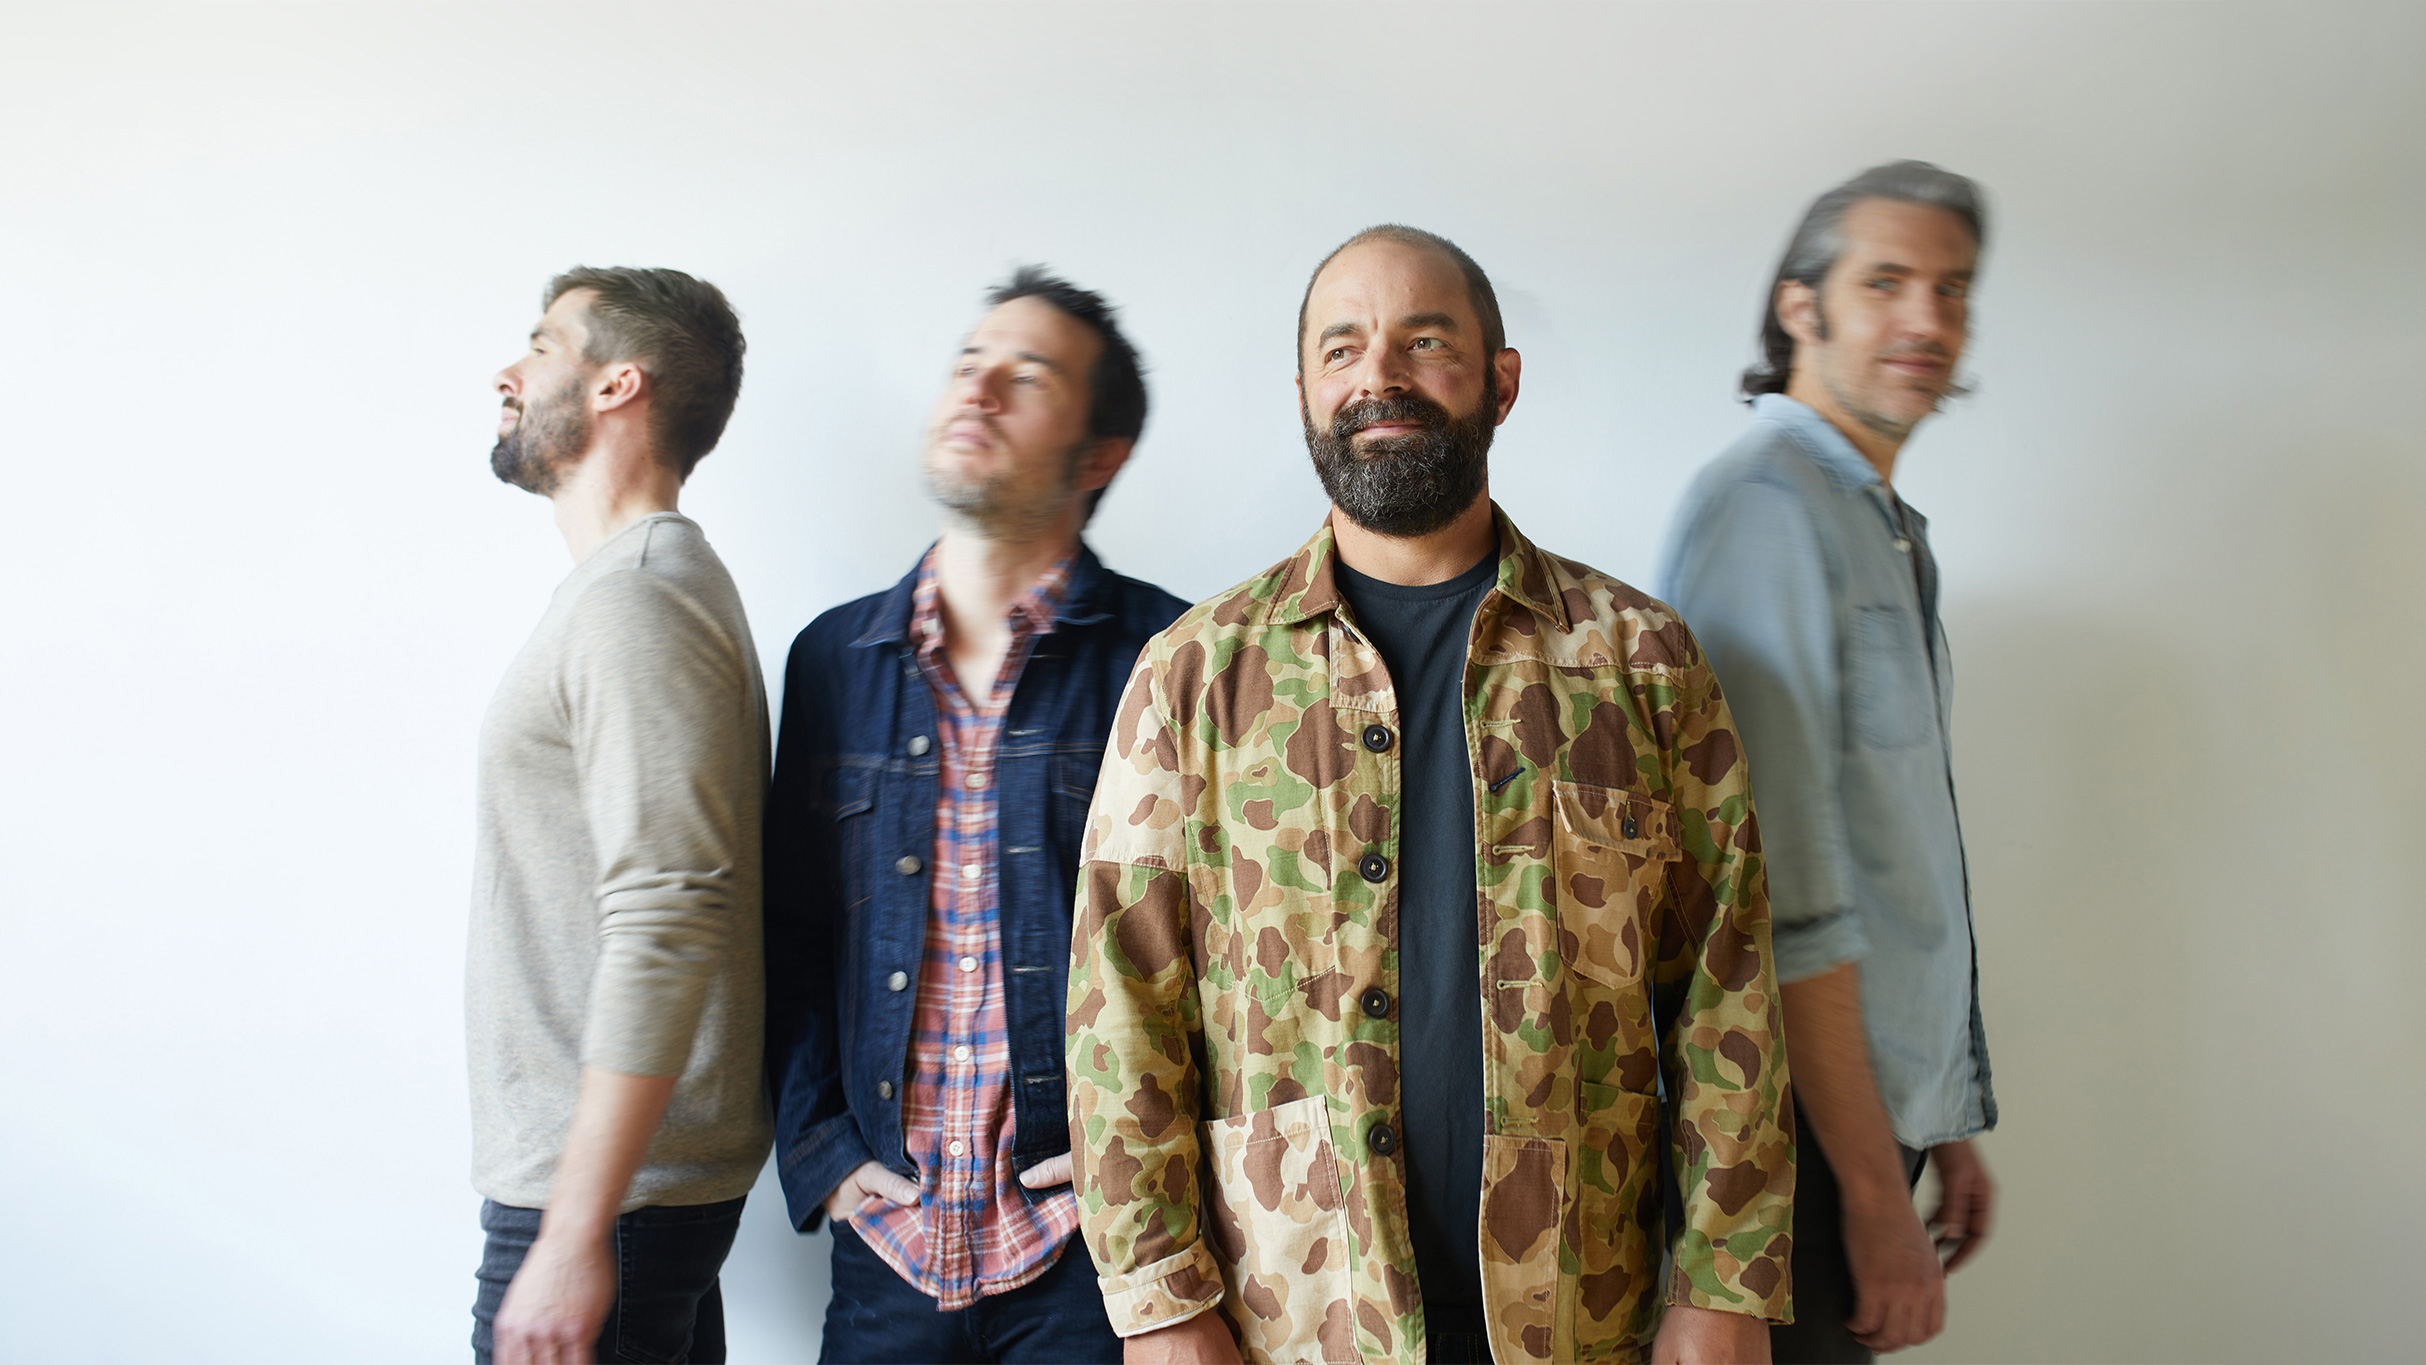 Drew Holcomb & The Neighbors - Find Your People Tour @ Rialto Theatre